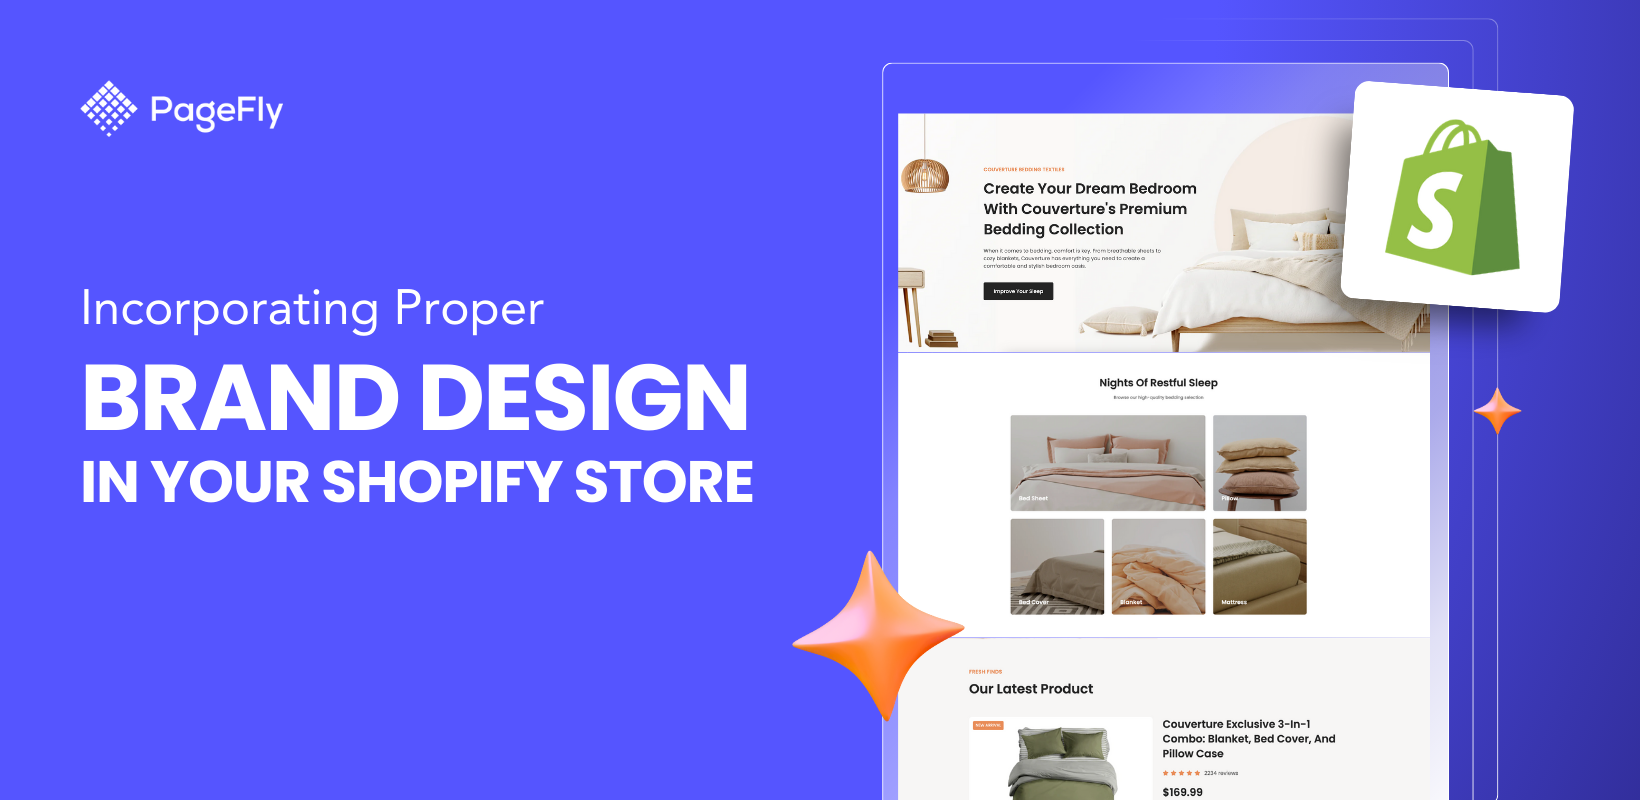 Incorporating Proper Brand Design in Your Shopify Store